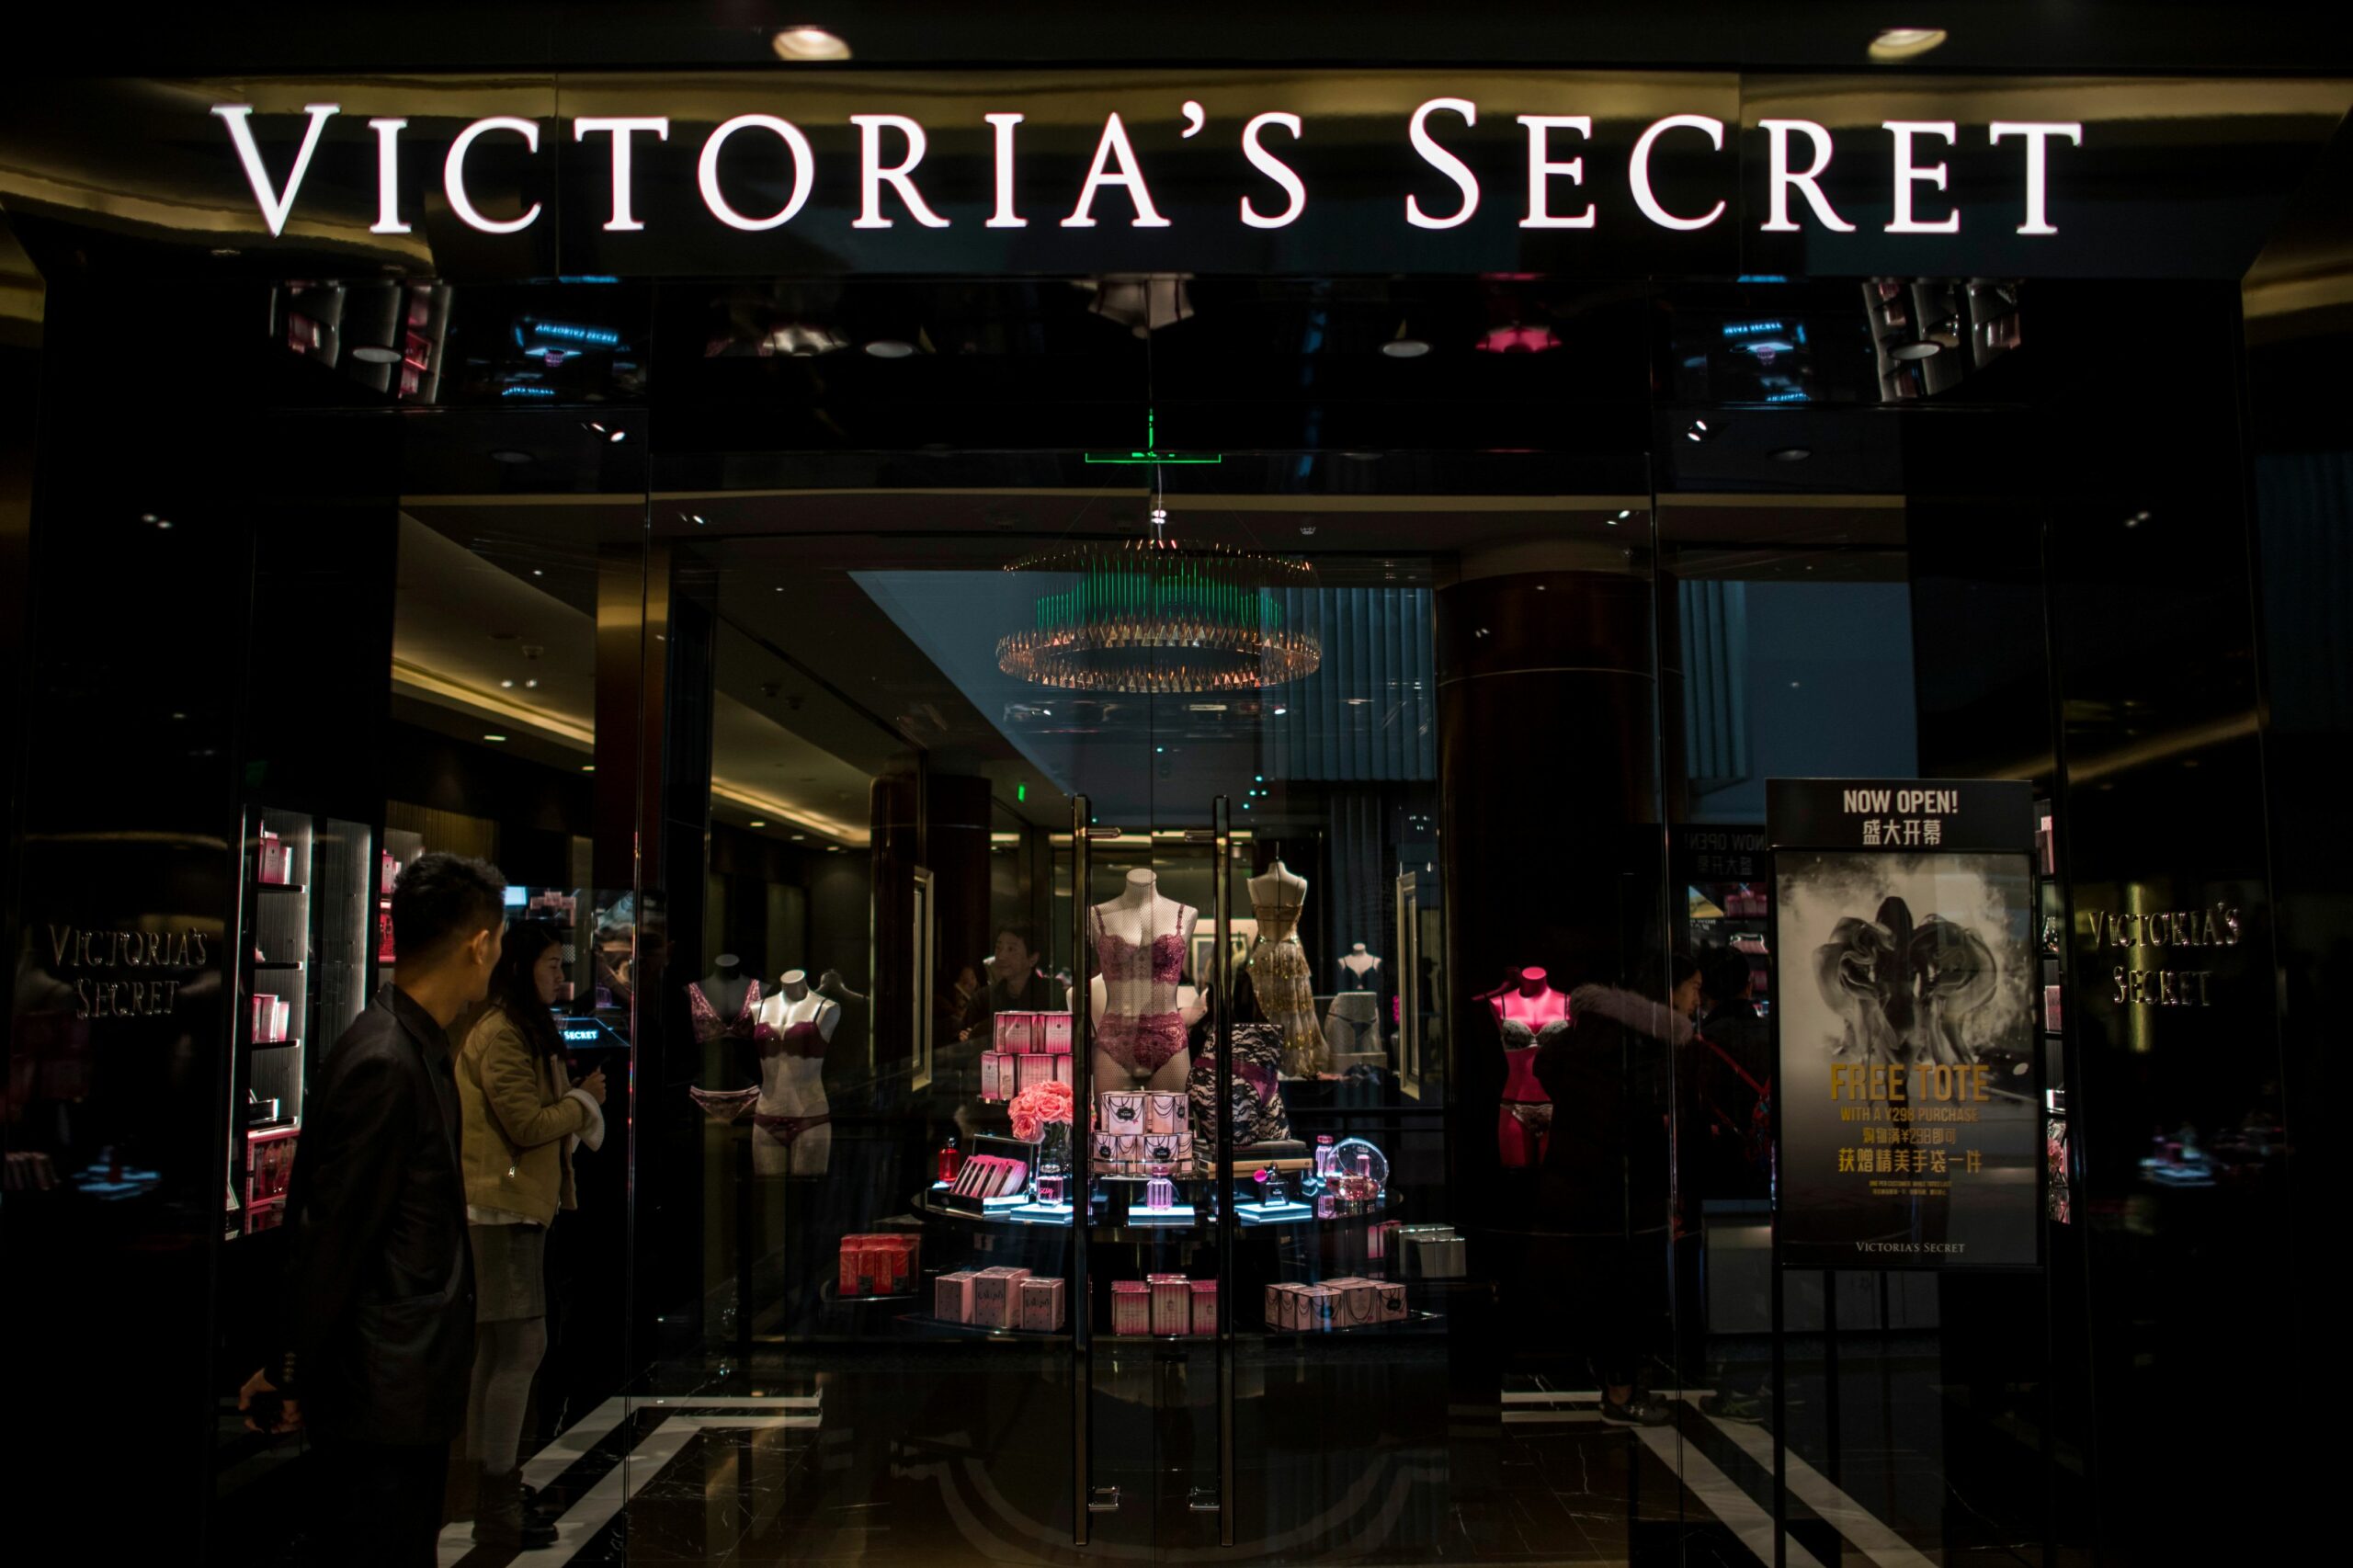 L Brands nears sale of Victoria’s Secret to Sycamore Partners